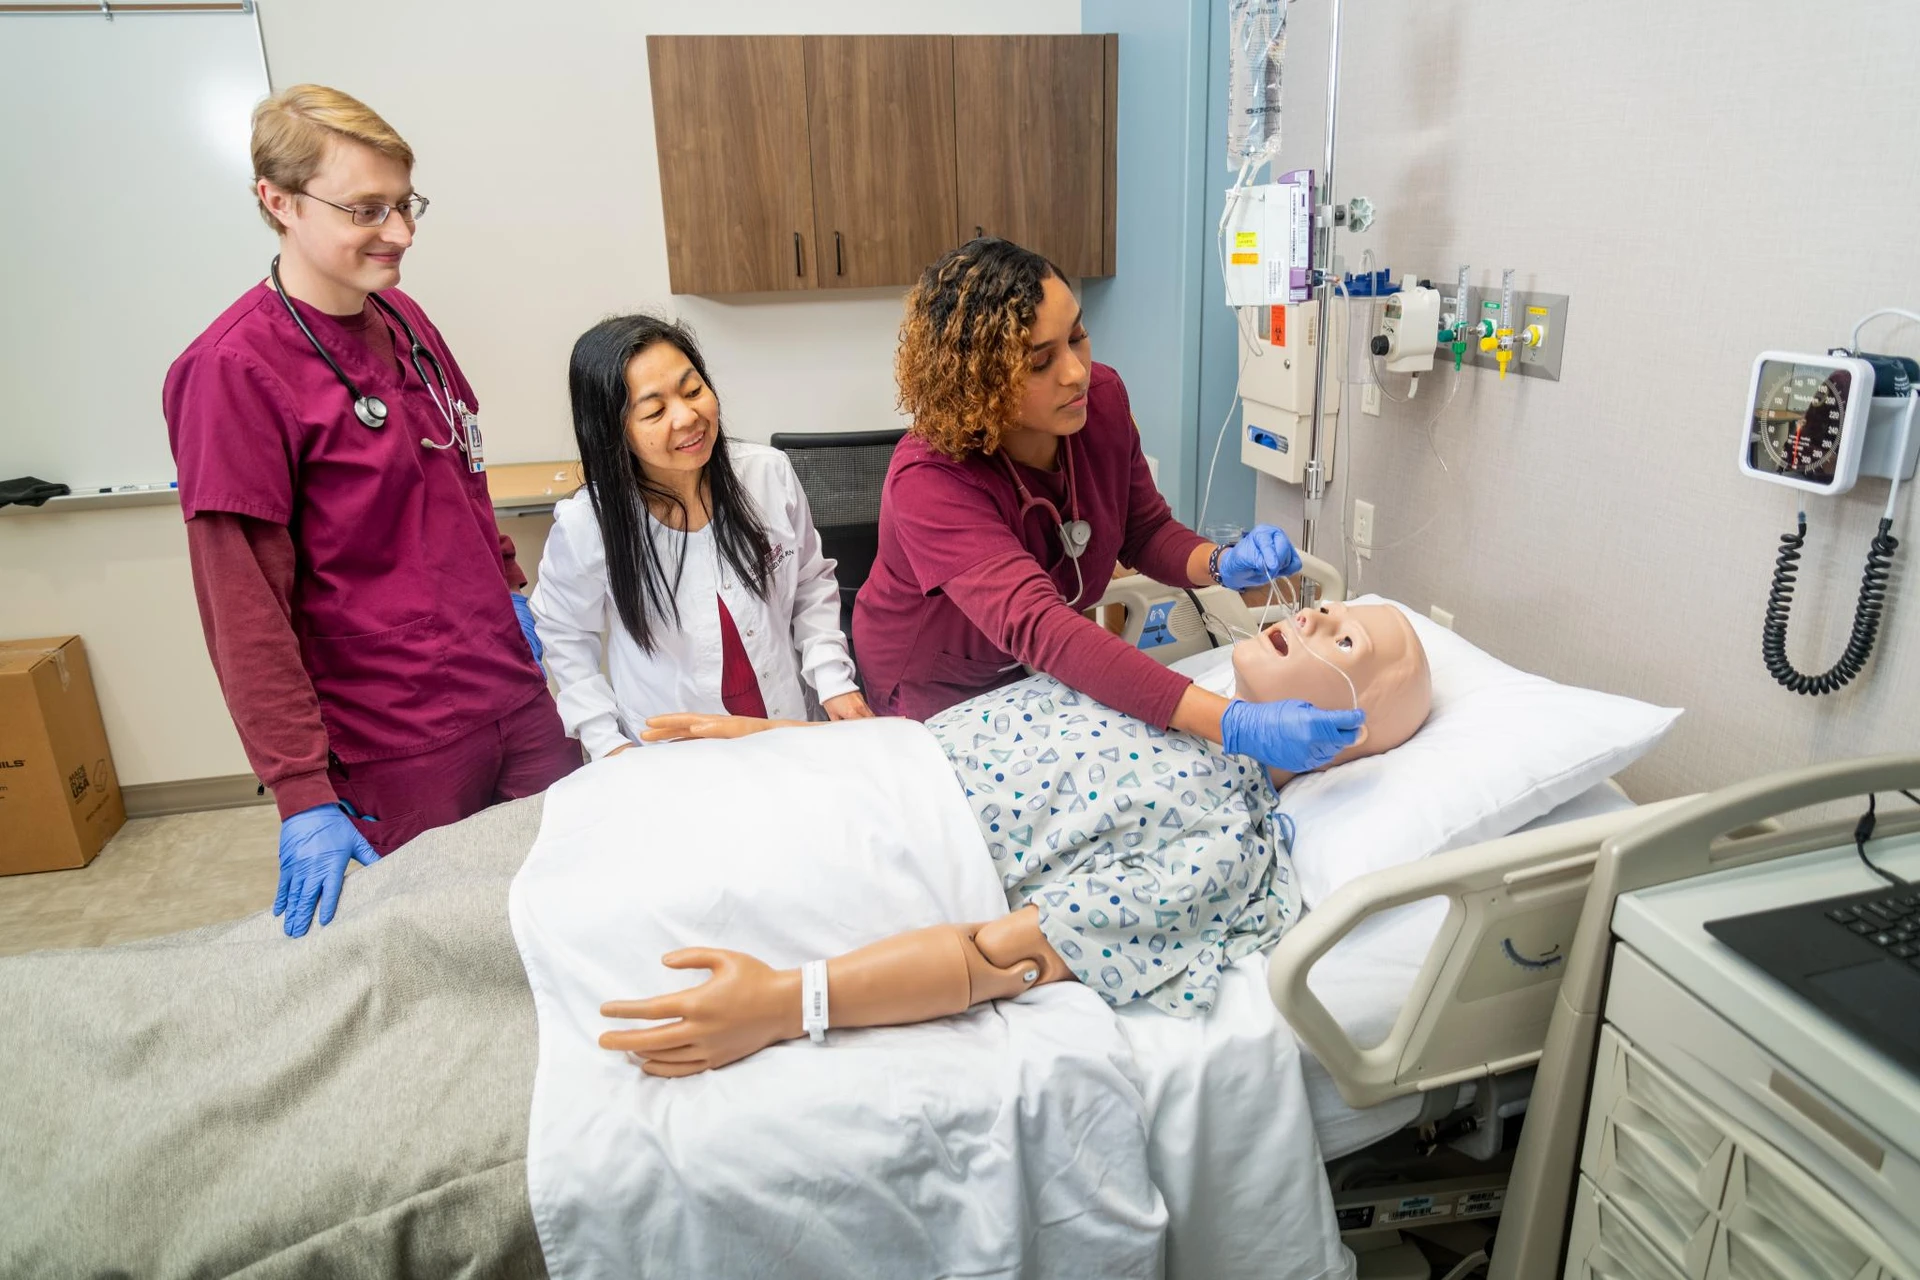 A nursing student, dressed in maroon scrubs, places oxygen tubes in a fake patients nose while a peer and professor stand by and watch